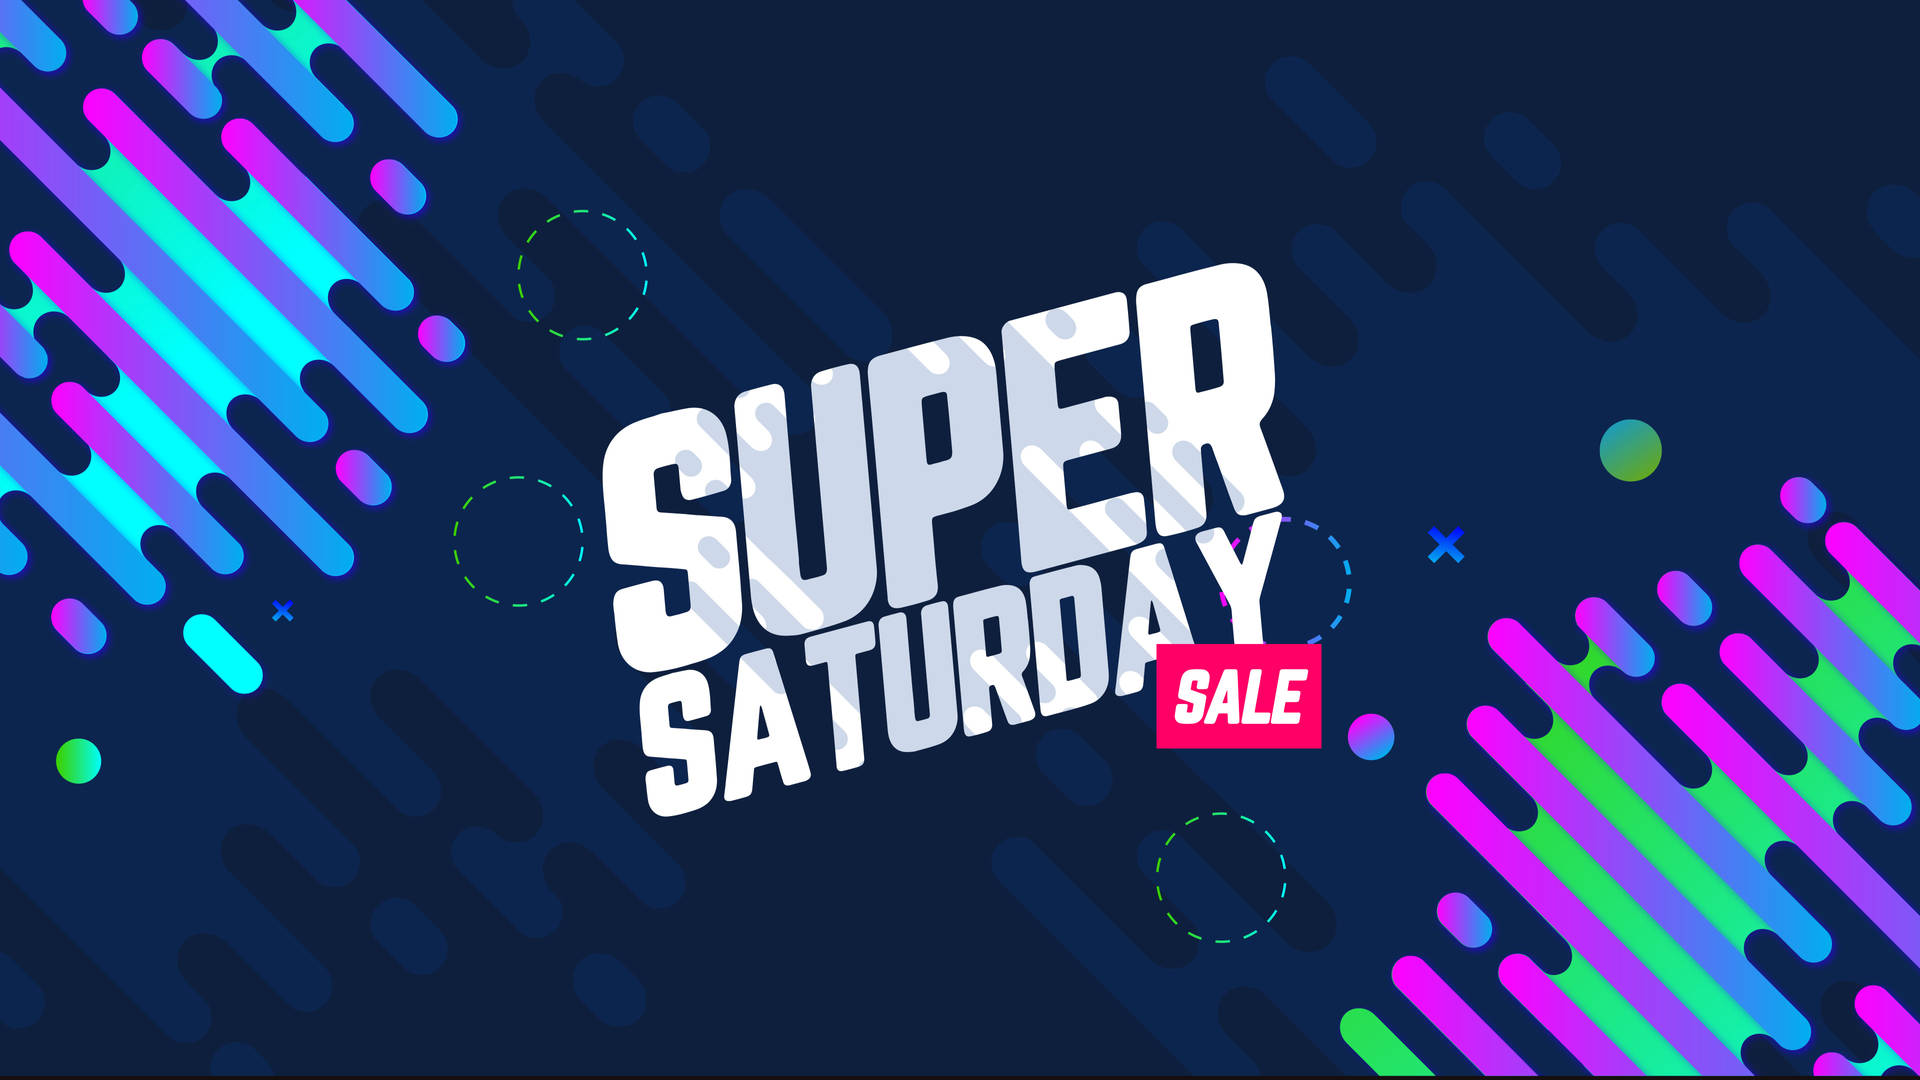 Exciting Super Saturday Sale Over A Dramatic Dark Blue Background Background